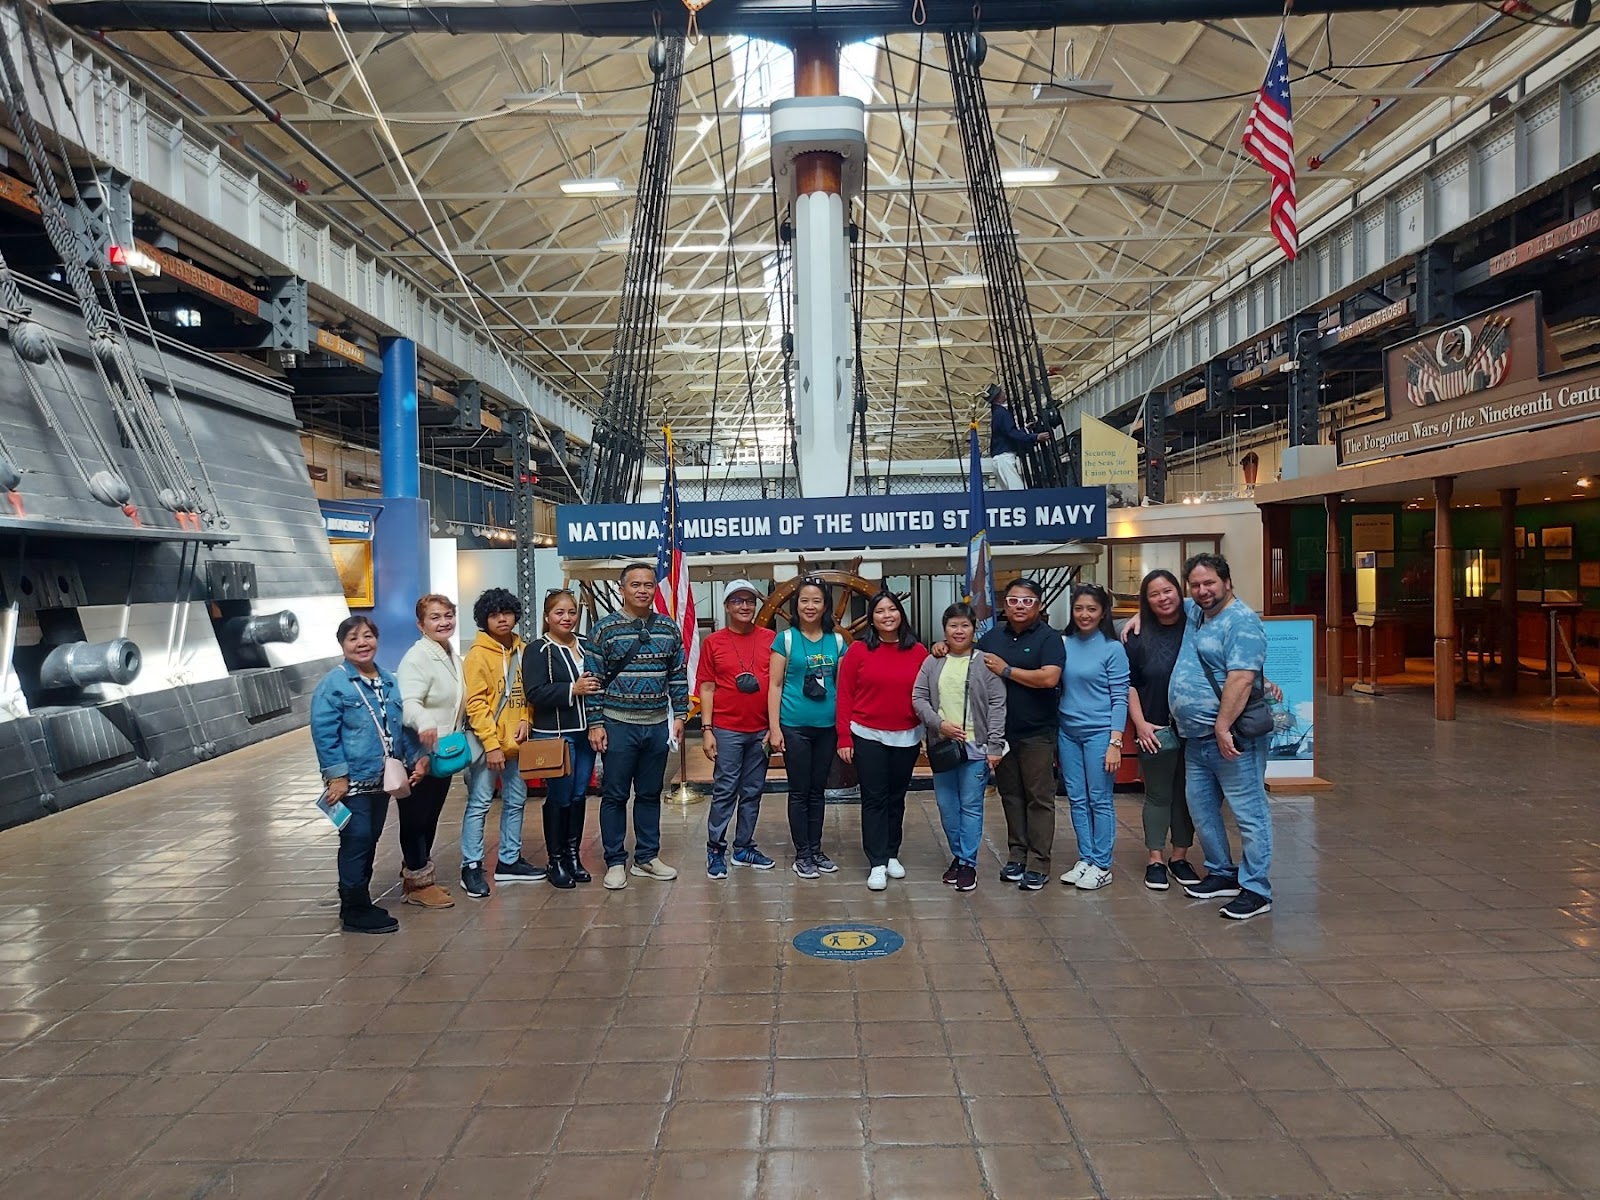 Participants to the special tour of the National Museum of the U.S. Navy